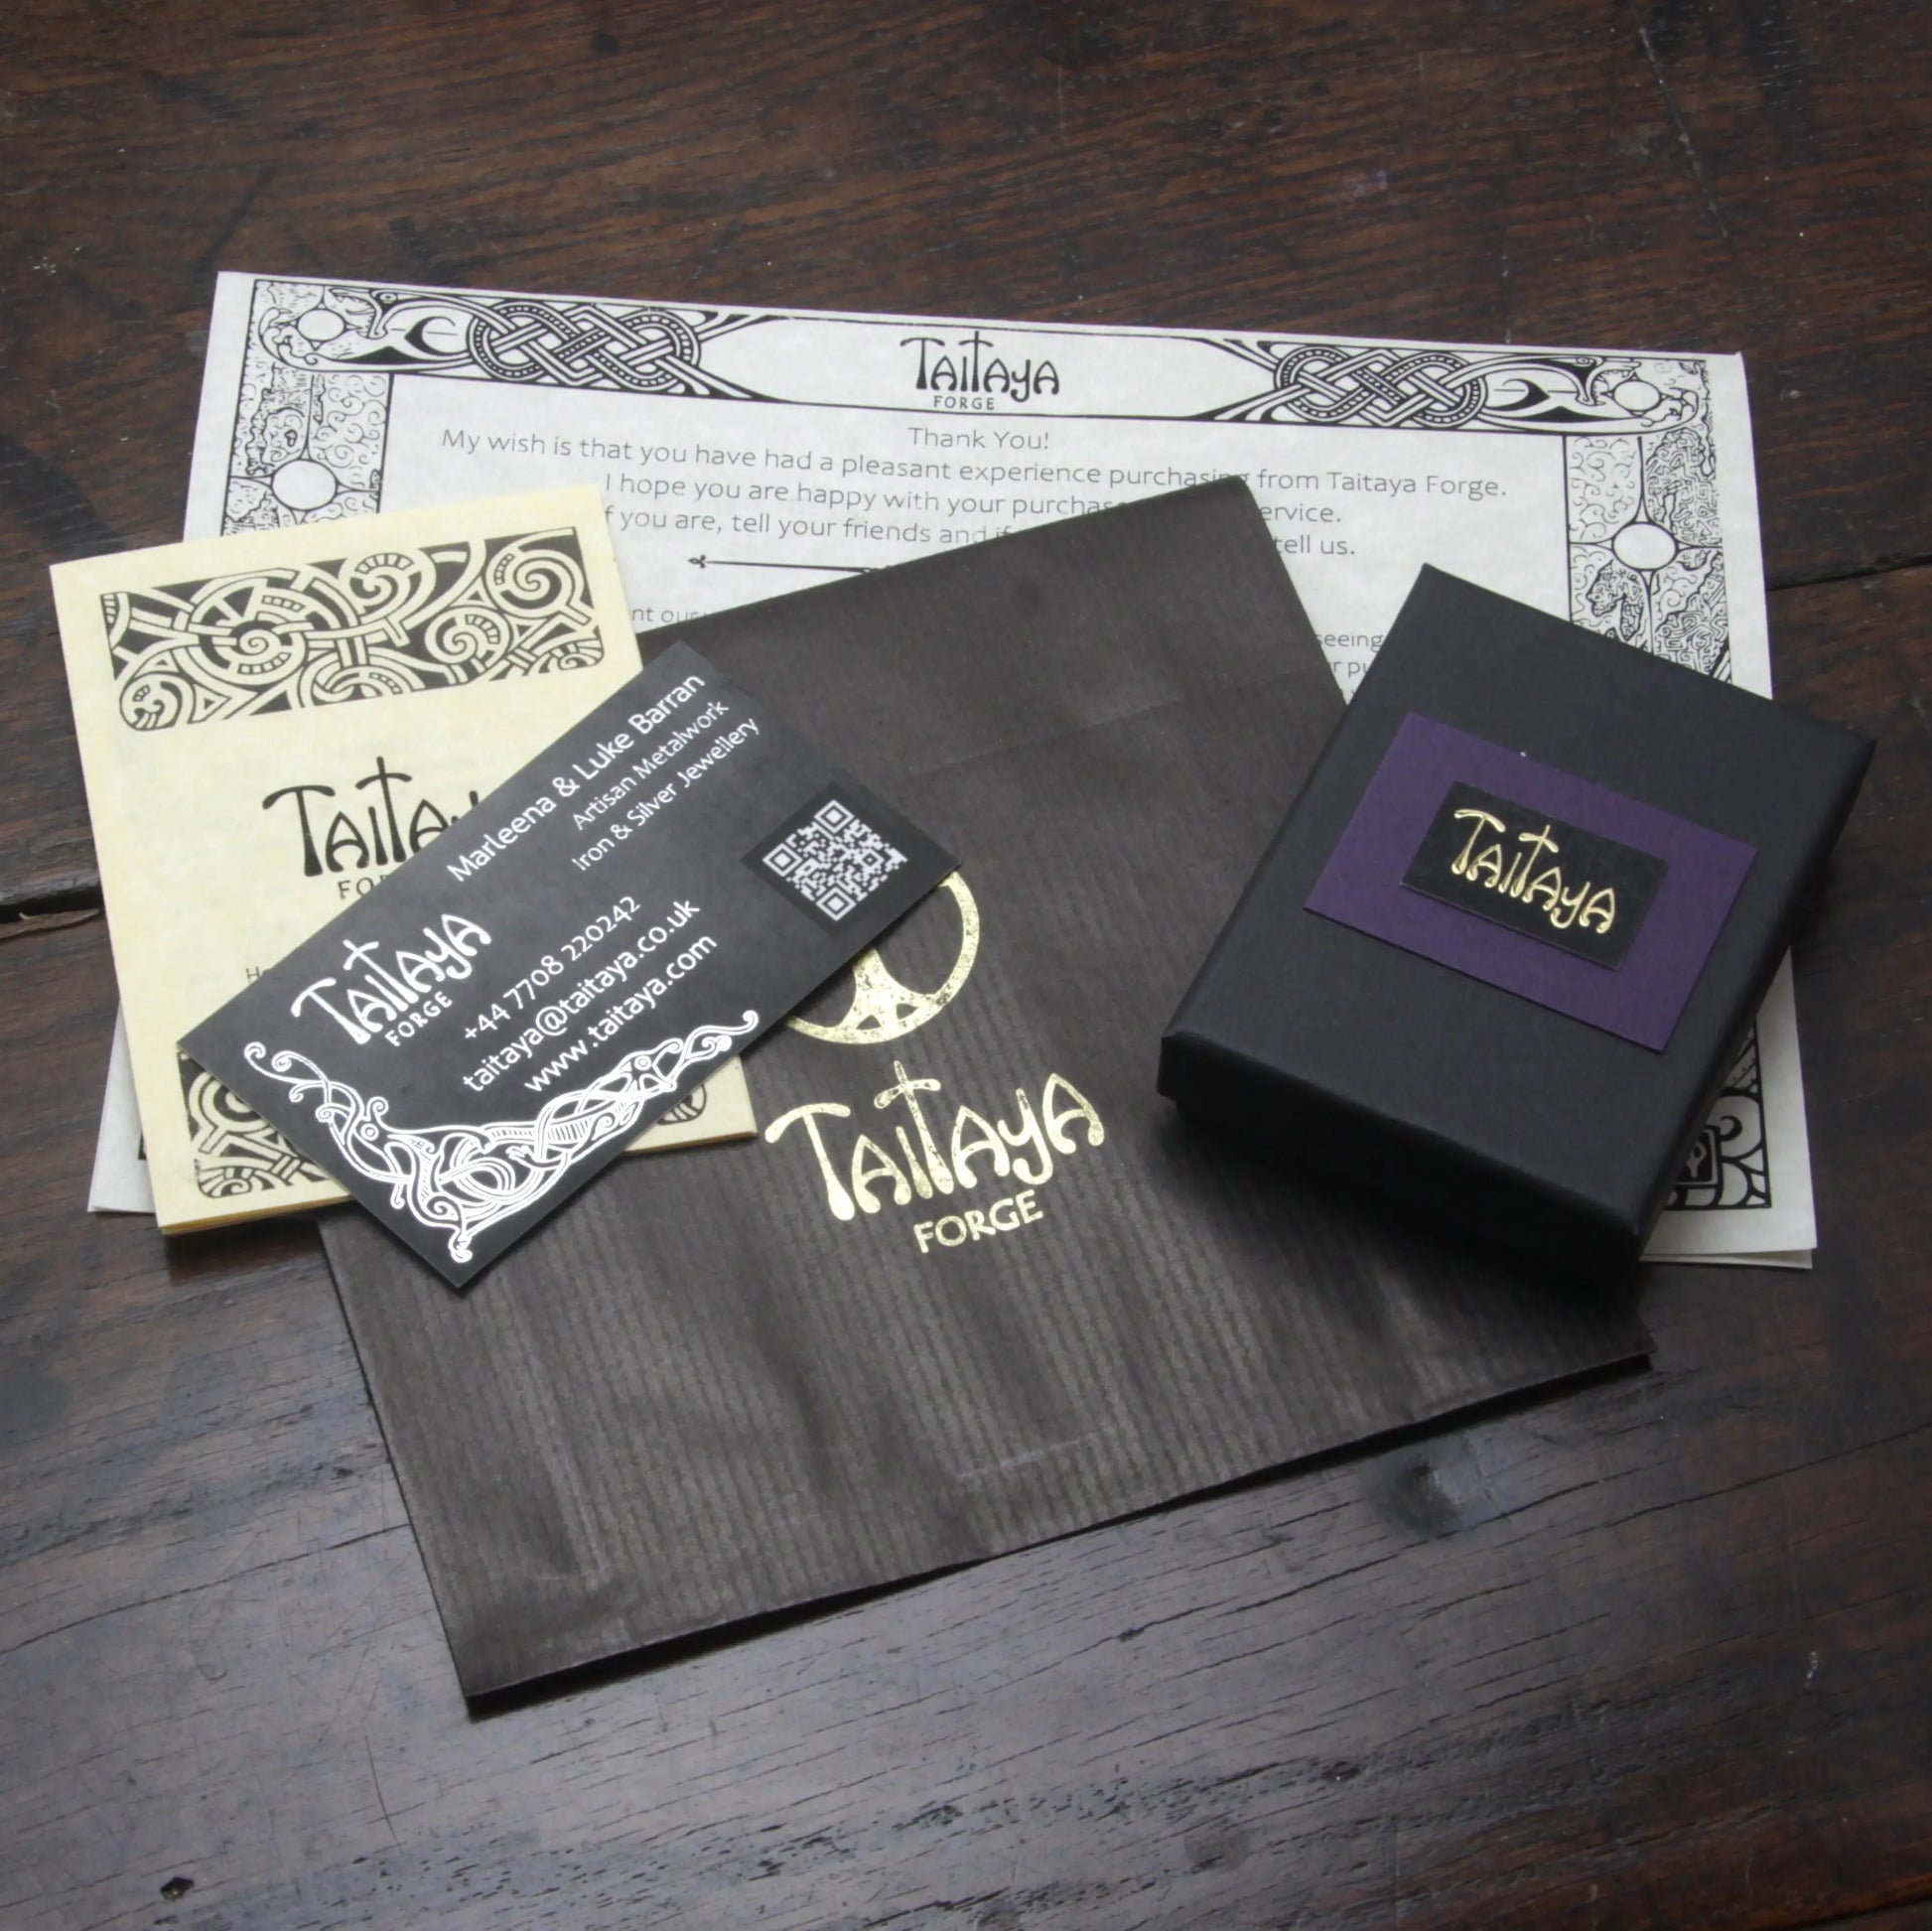 Sample of our packaging that comes with the jewellery from Taitaya Forge. Includes a business card, care instruction and a recyclable gift box.